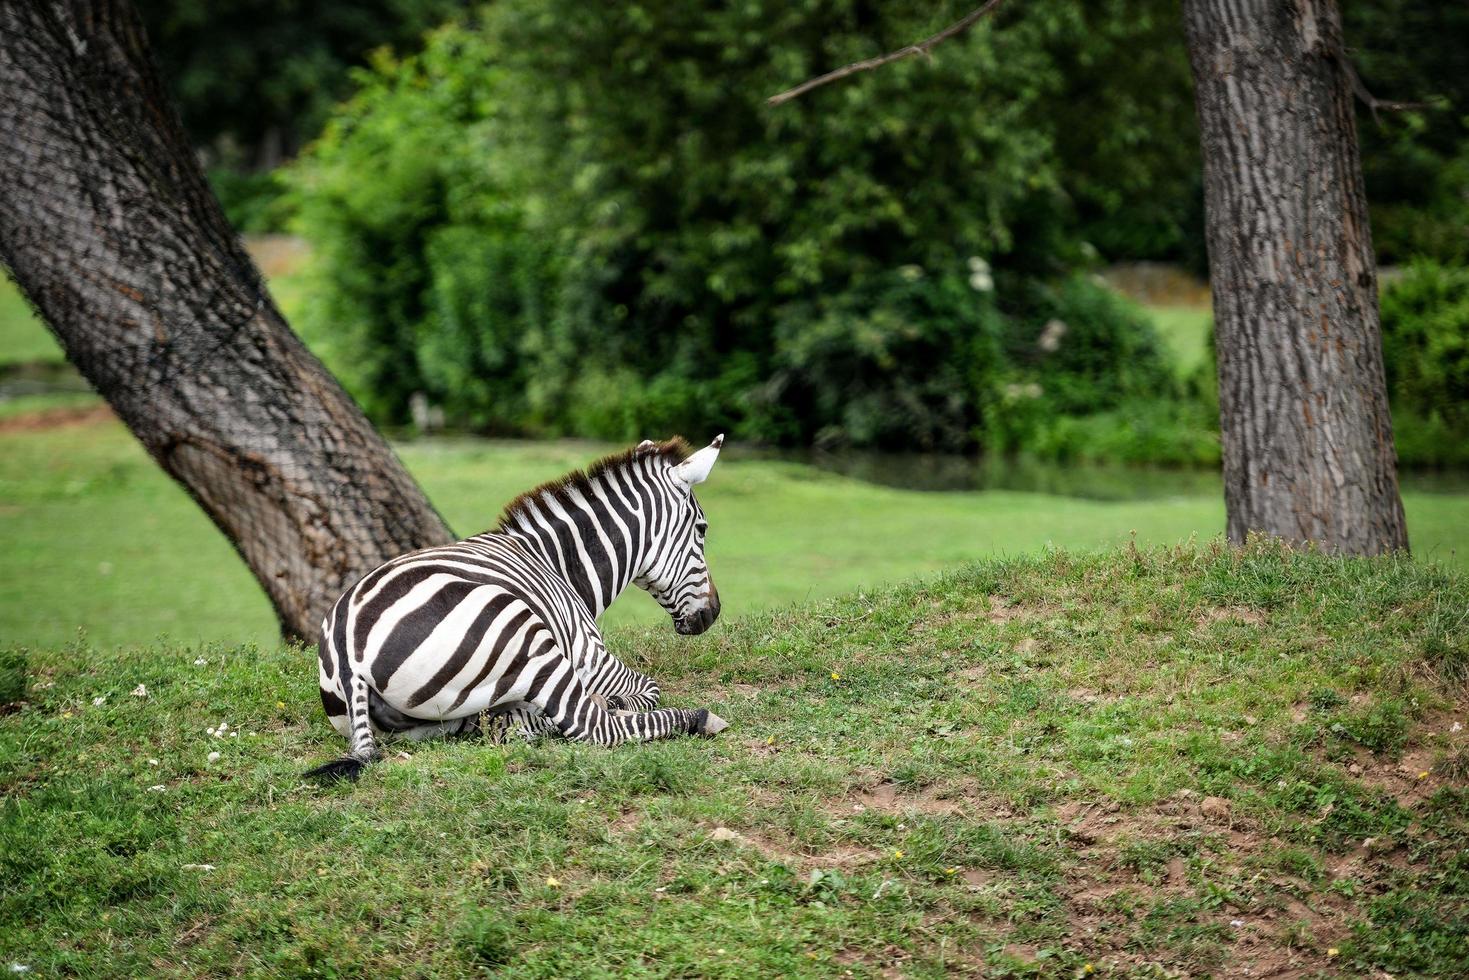 Animal close-up photography. Zebra in the wild. photo